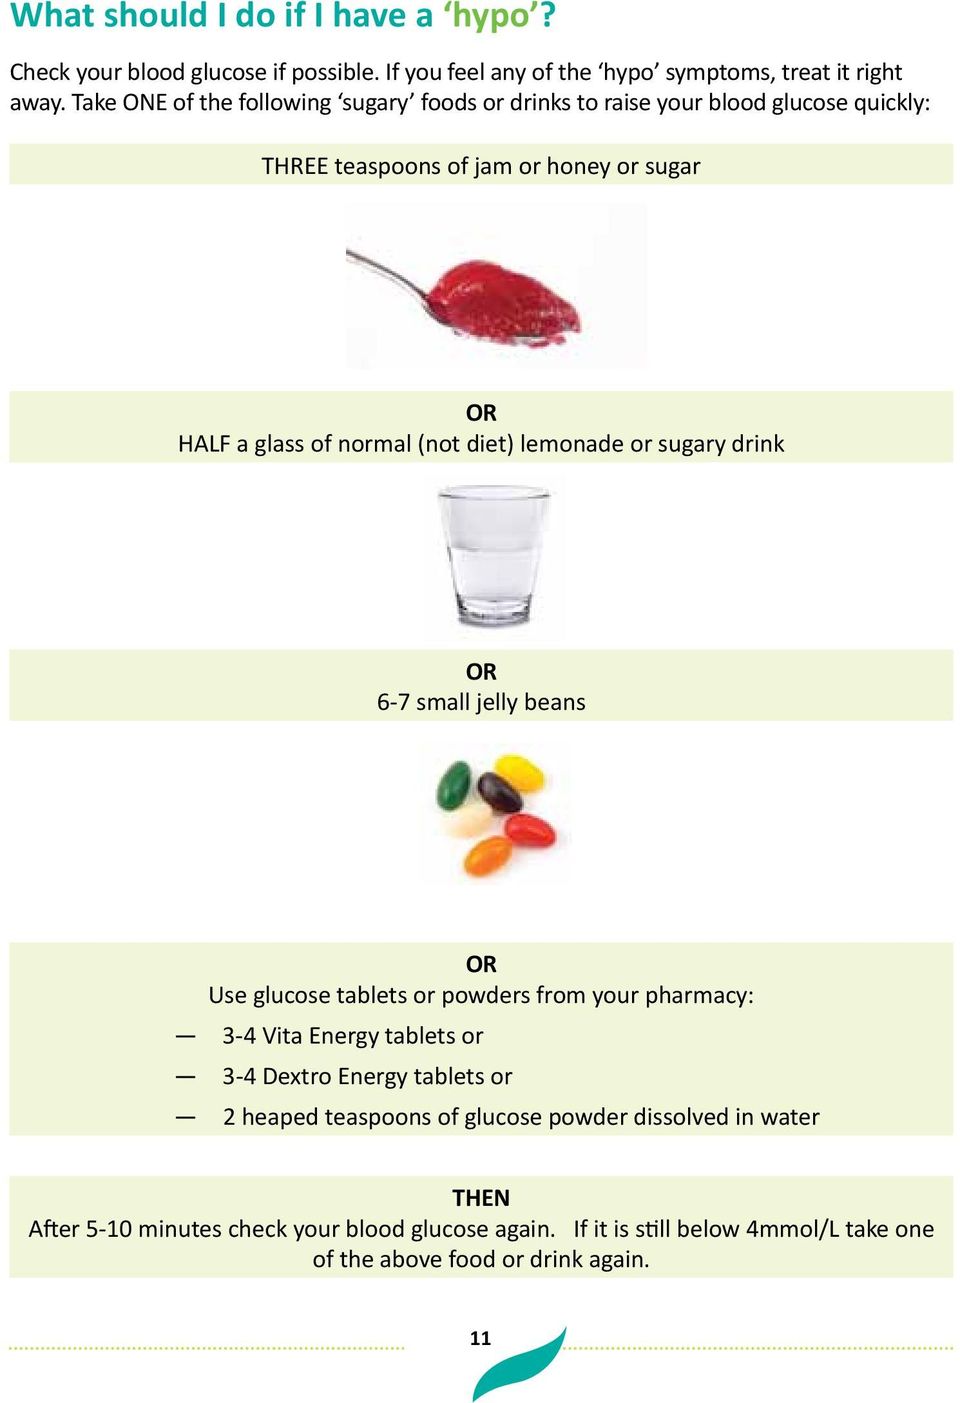 diet) lemonade or sugary drink OR 6-7 small jelly beans OR Use glucose tablets or powders from your pharmacy: 3-4 Vita Energy tablets or 3-4 Dextro Energy